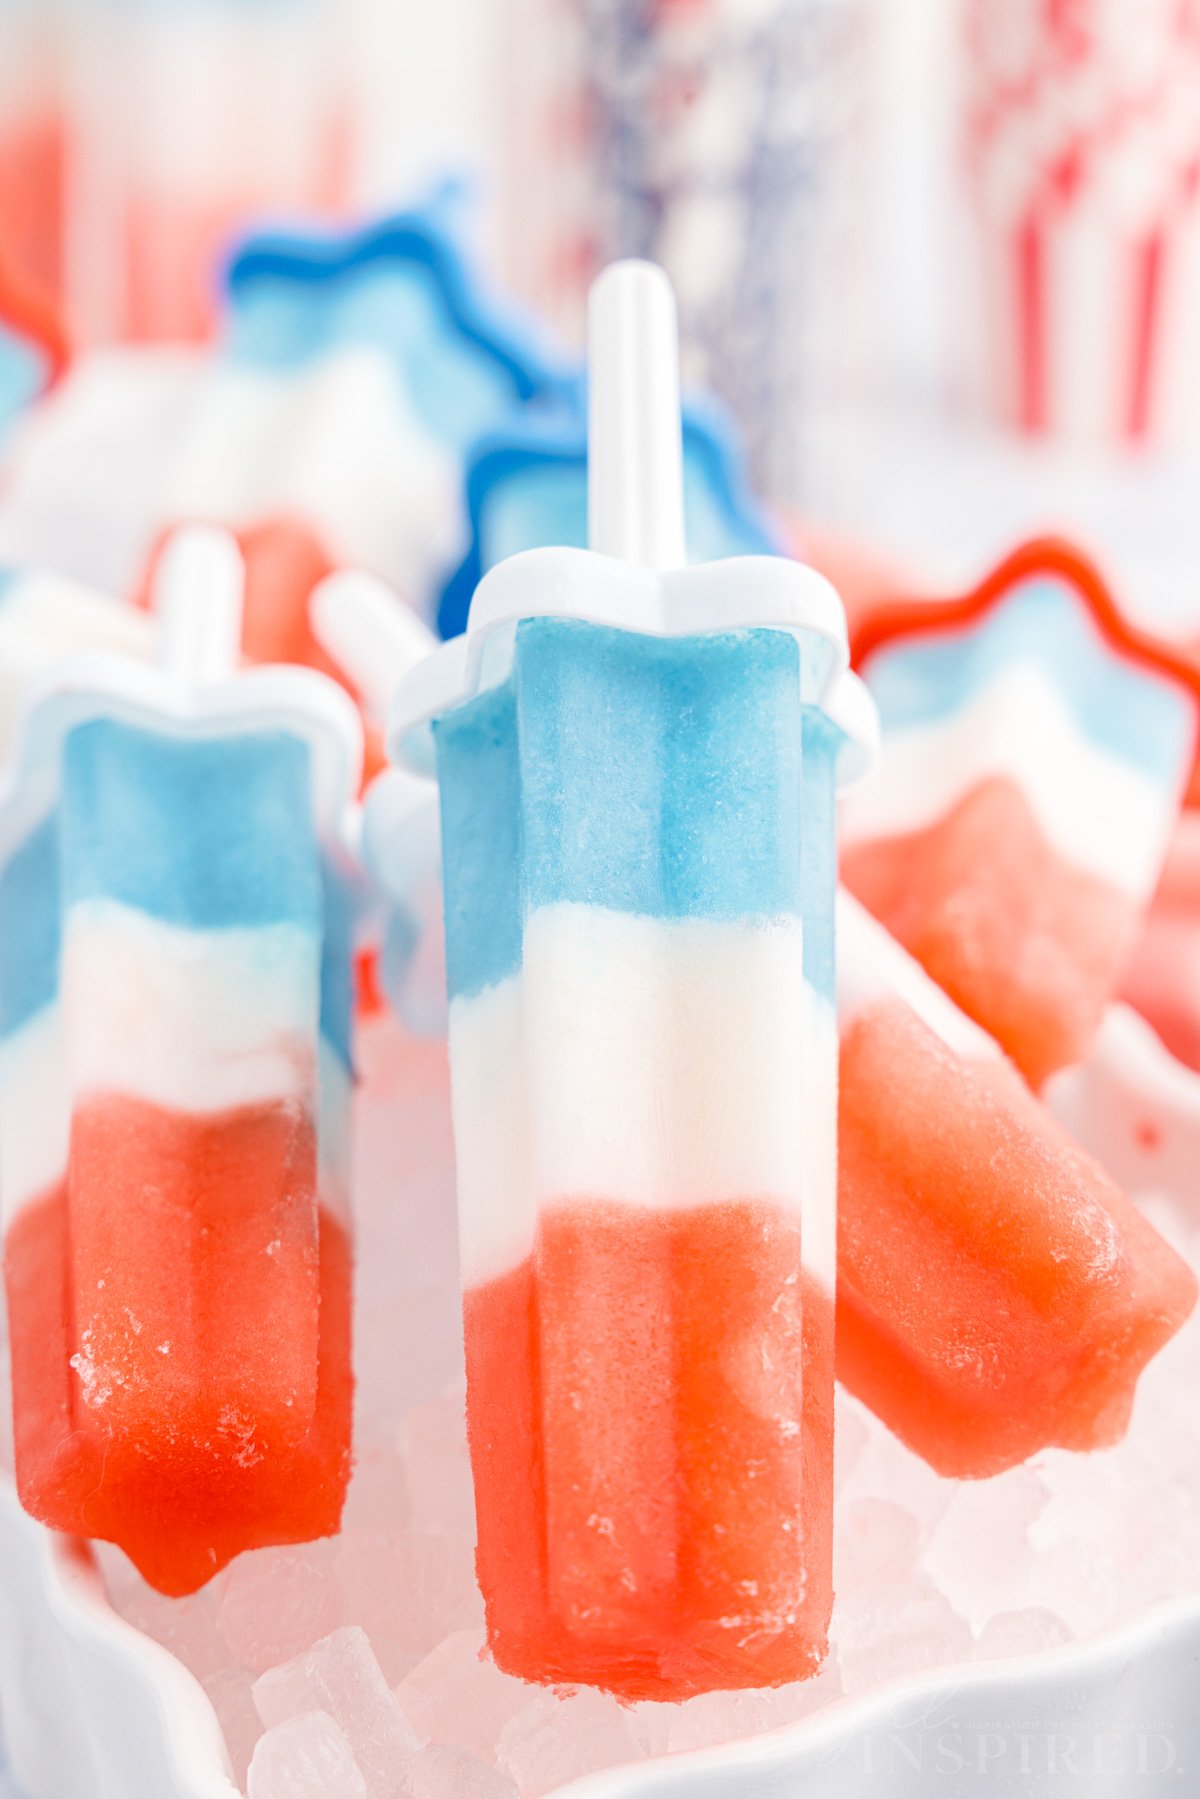 Bomb Pops stacked on each other on ice.